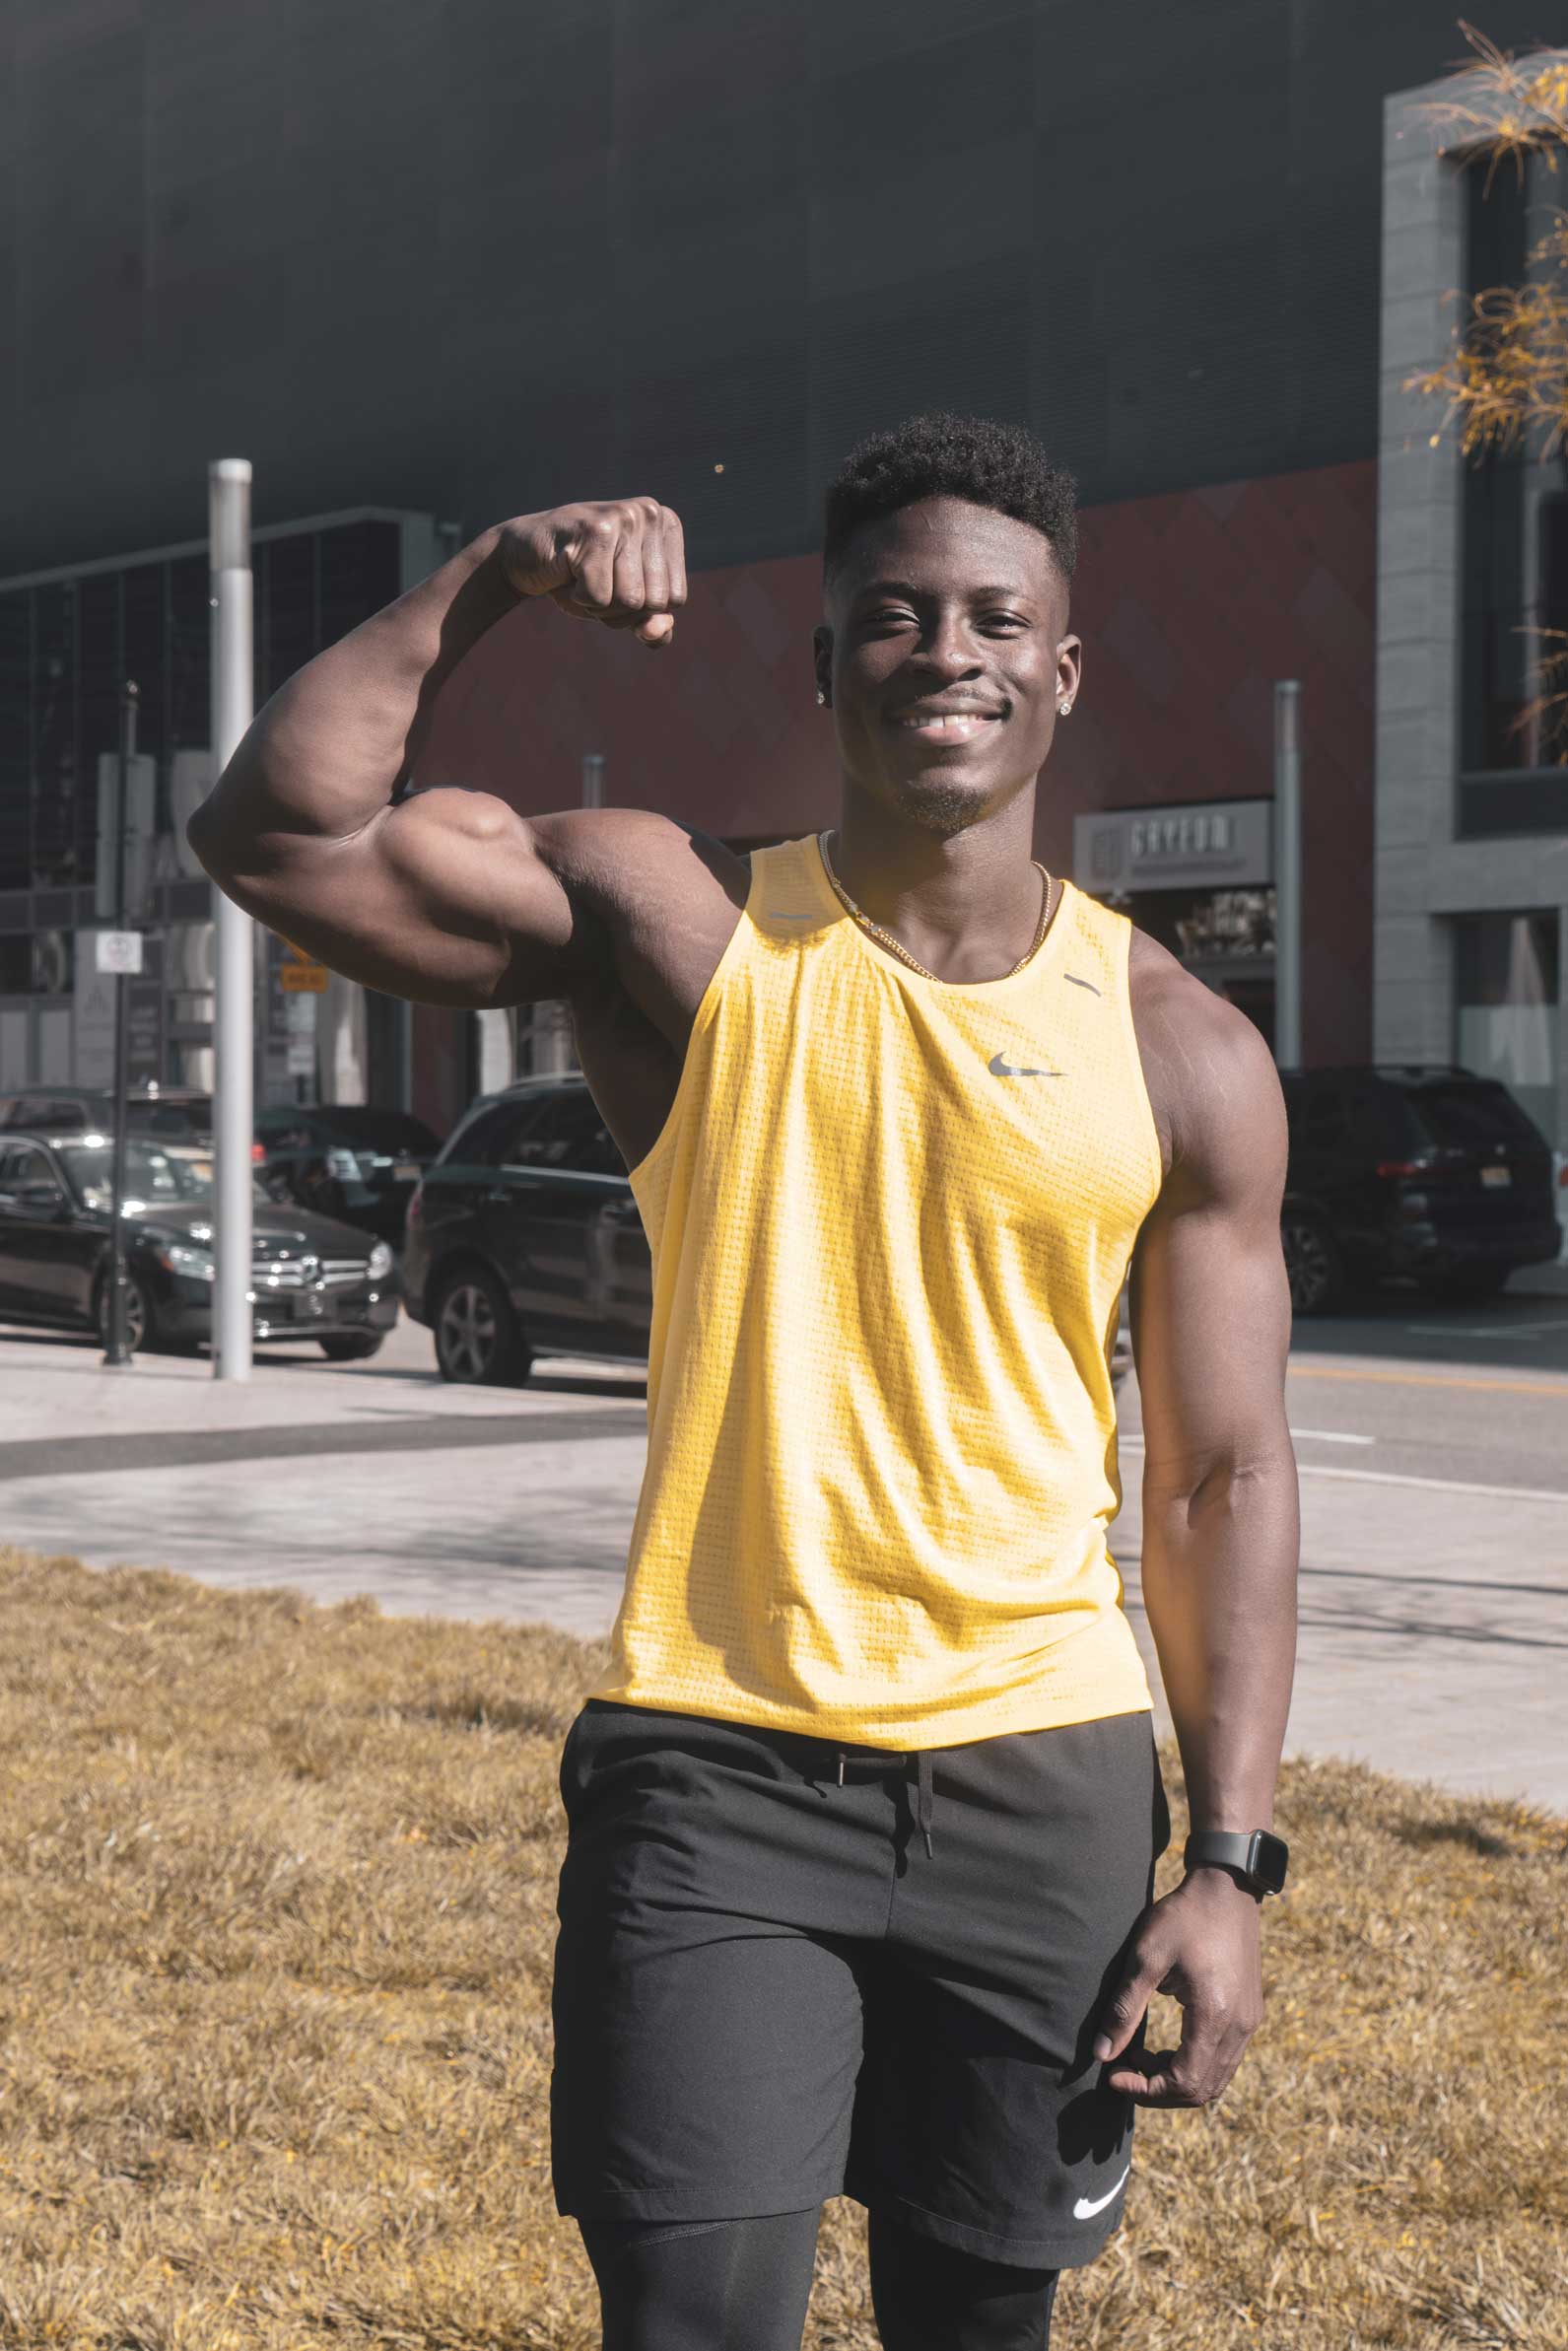 Image of HF wearing a yellow vest while flexing bicep